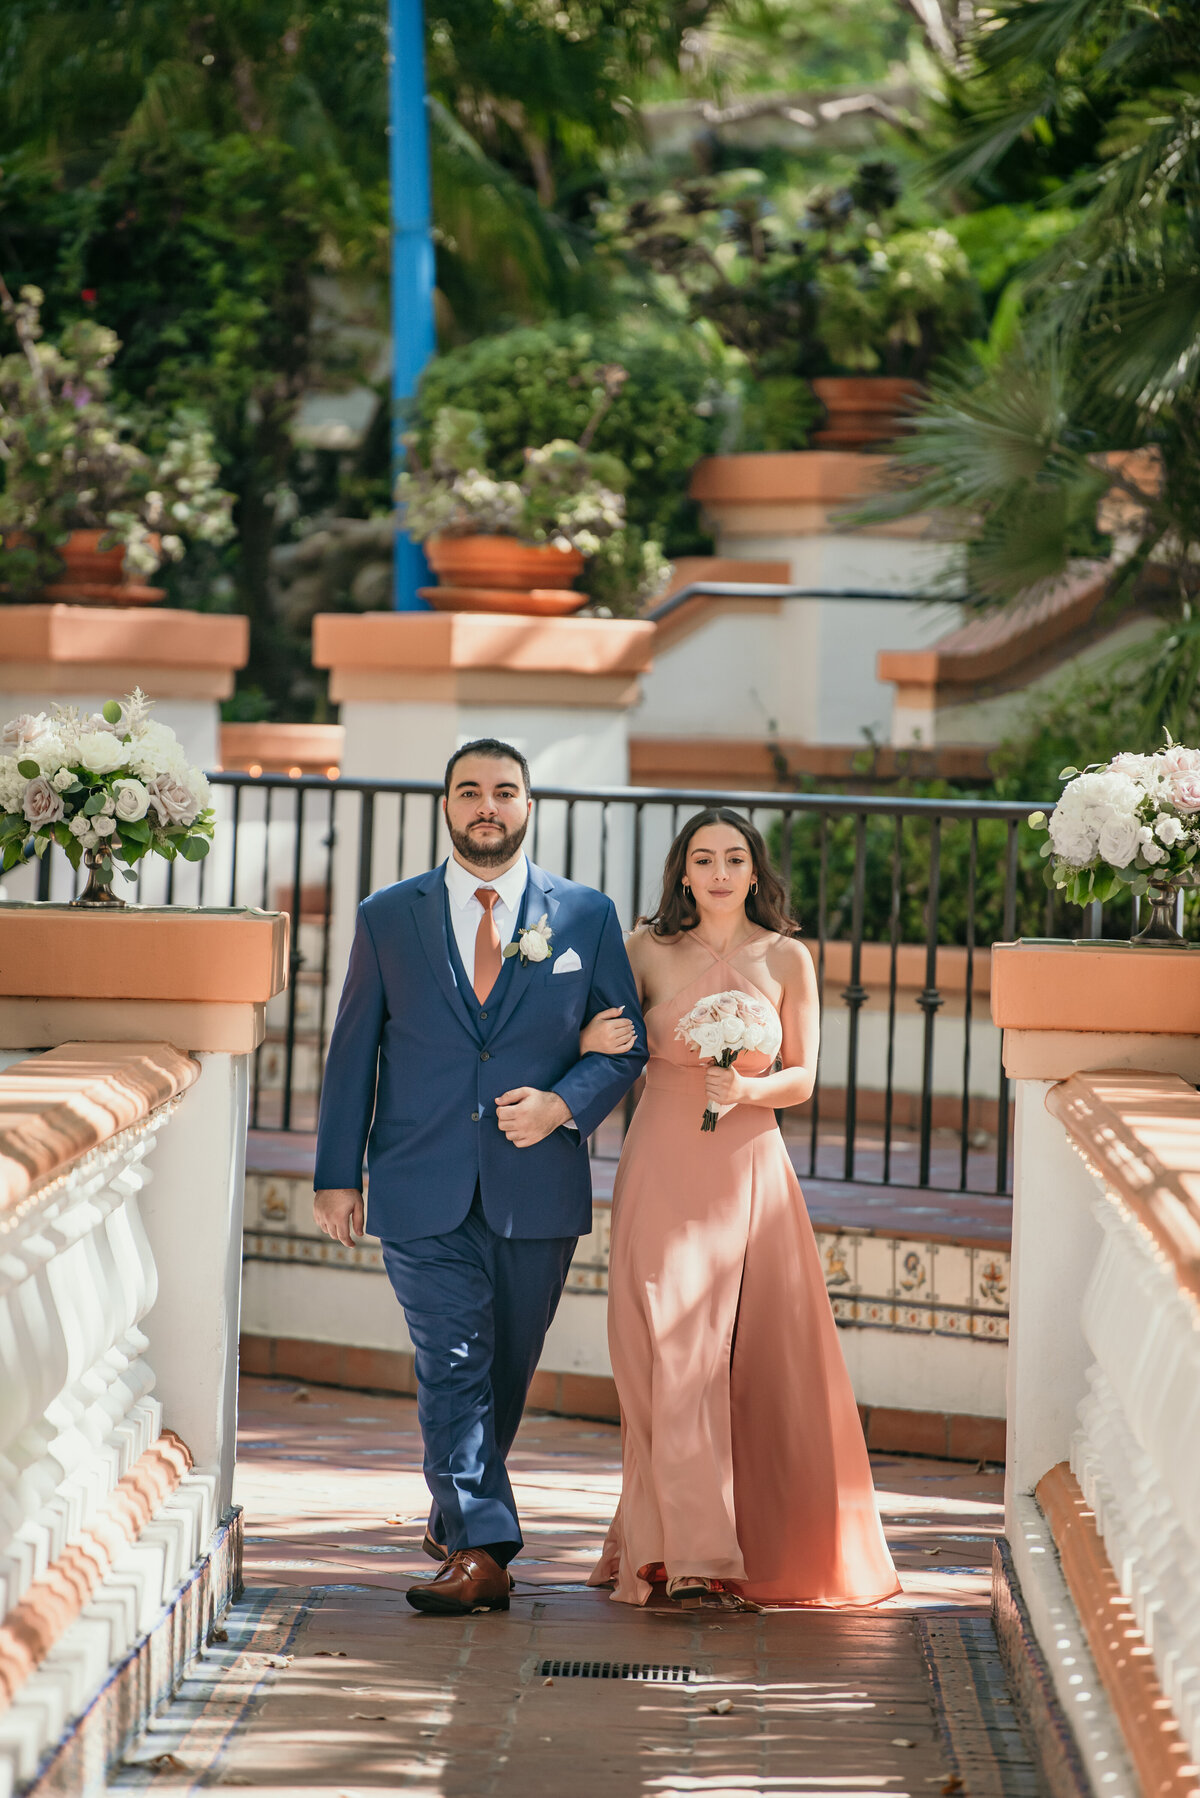 A luxury wedding at rancho las lomas in southern California photographed by christine bradshaw photography